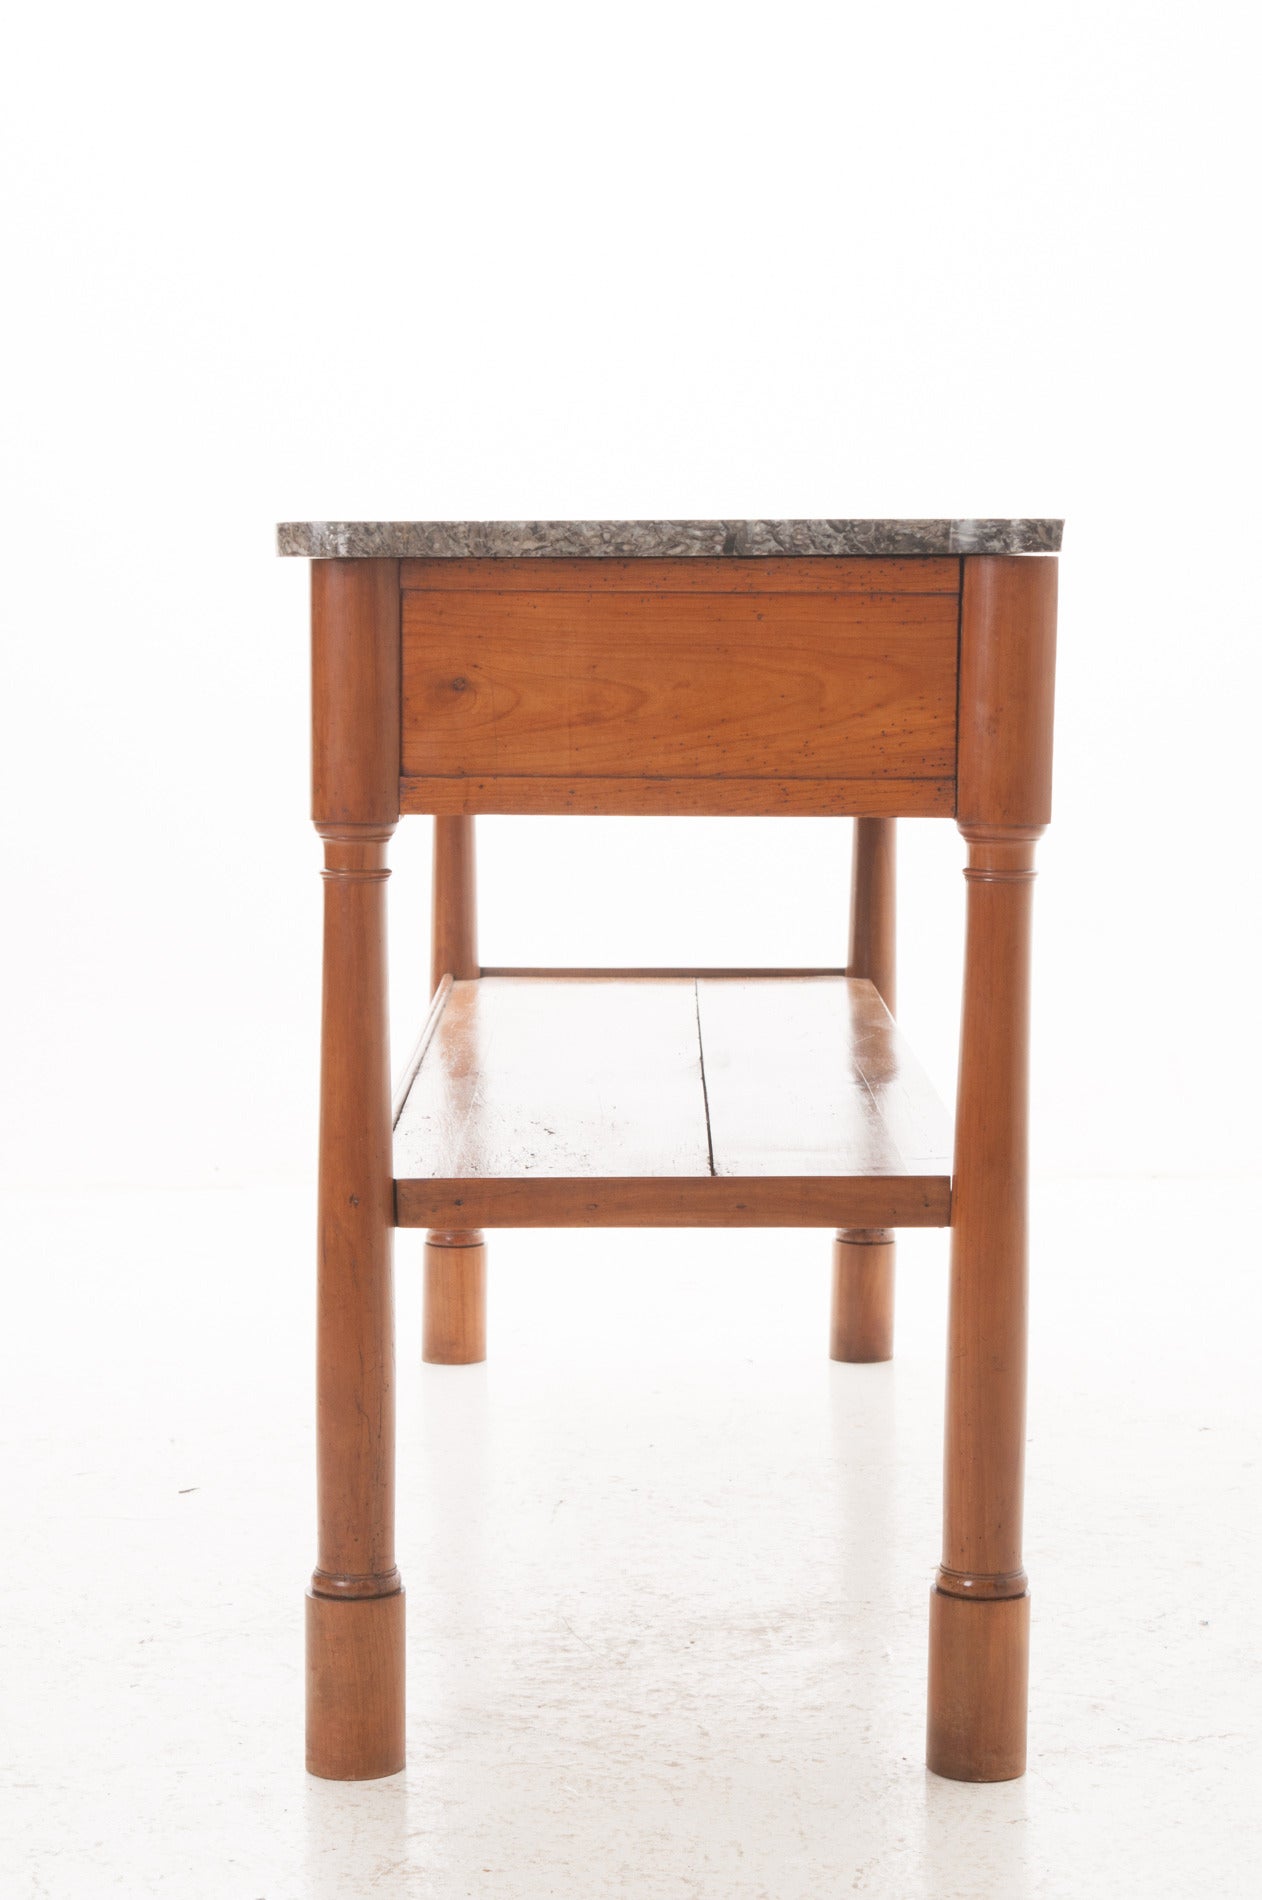 A gorgeous cherrywood server with its original shaped marble top. Three dovetailed, working drawers grace the front side of the simple apron. Interesting turned wood legs tapered down, all connecting with a simple stretcher shelf. 1810 The original